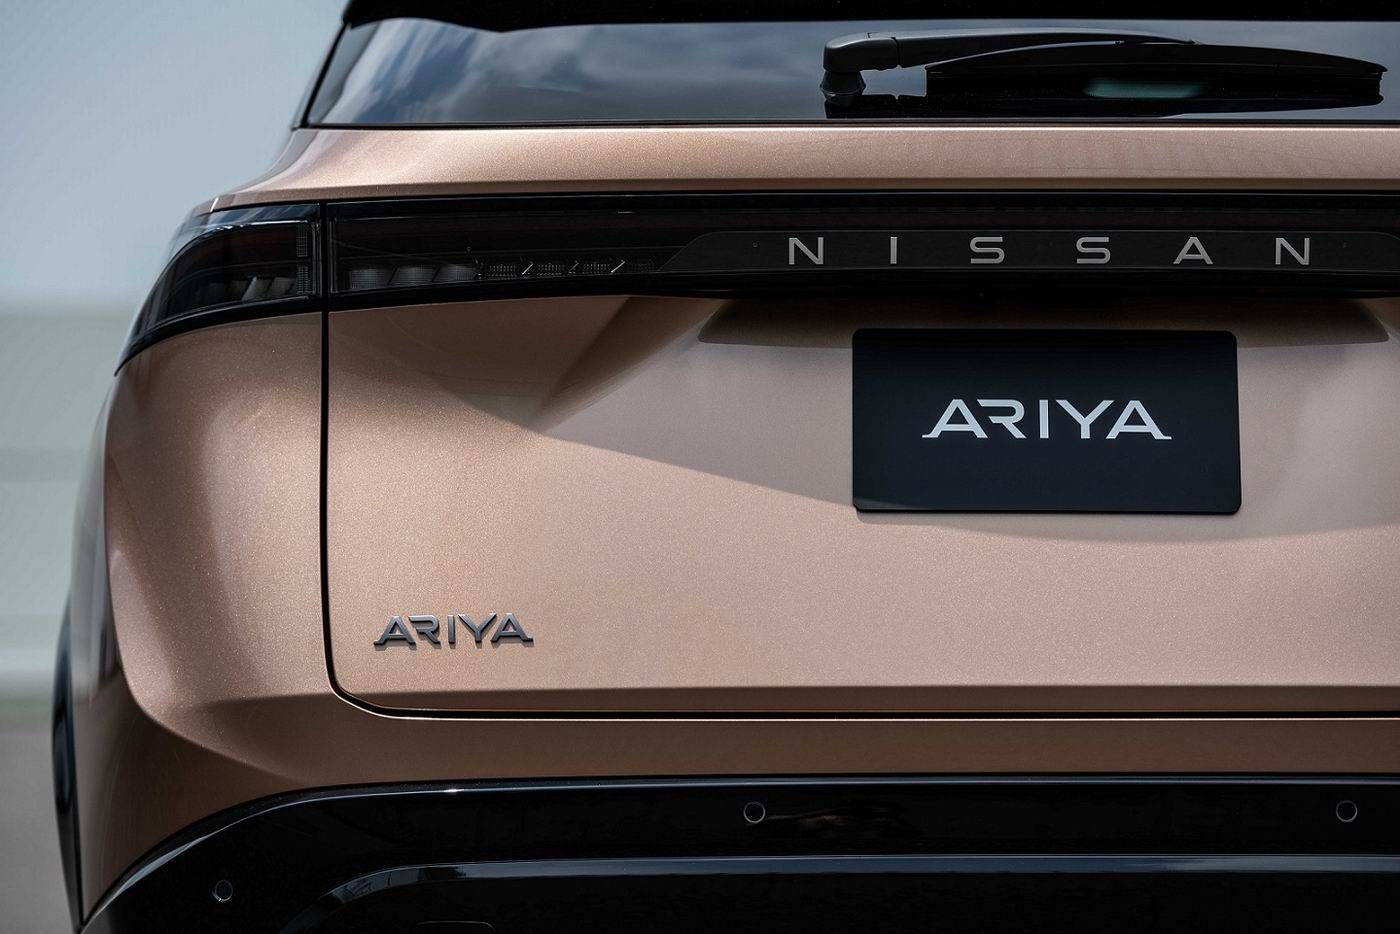 Introducing the All New Nissan Ariya, a 100% Electric Crossover!